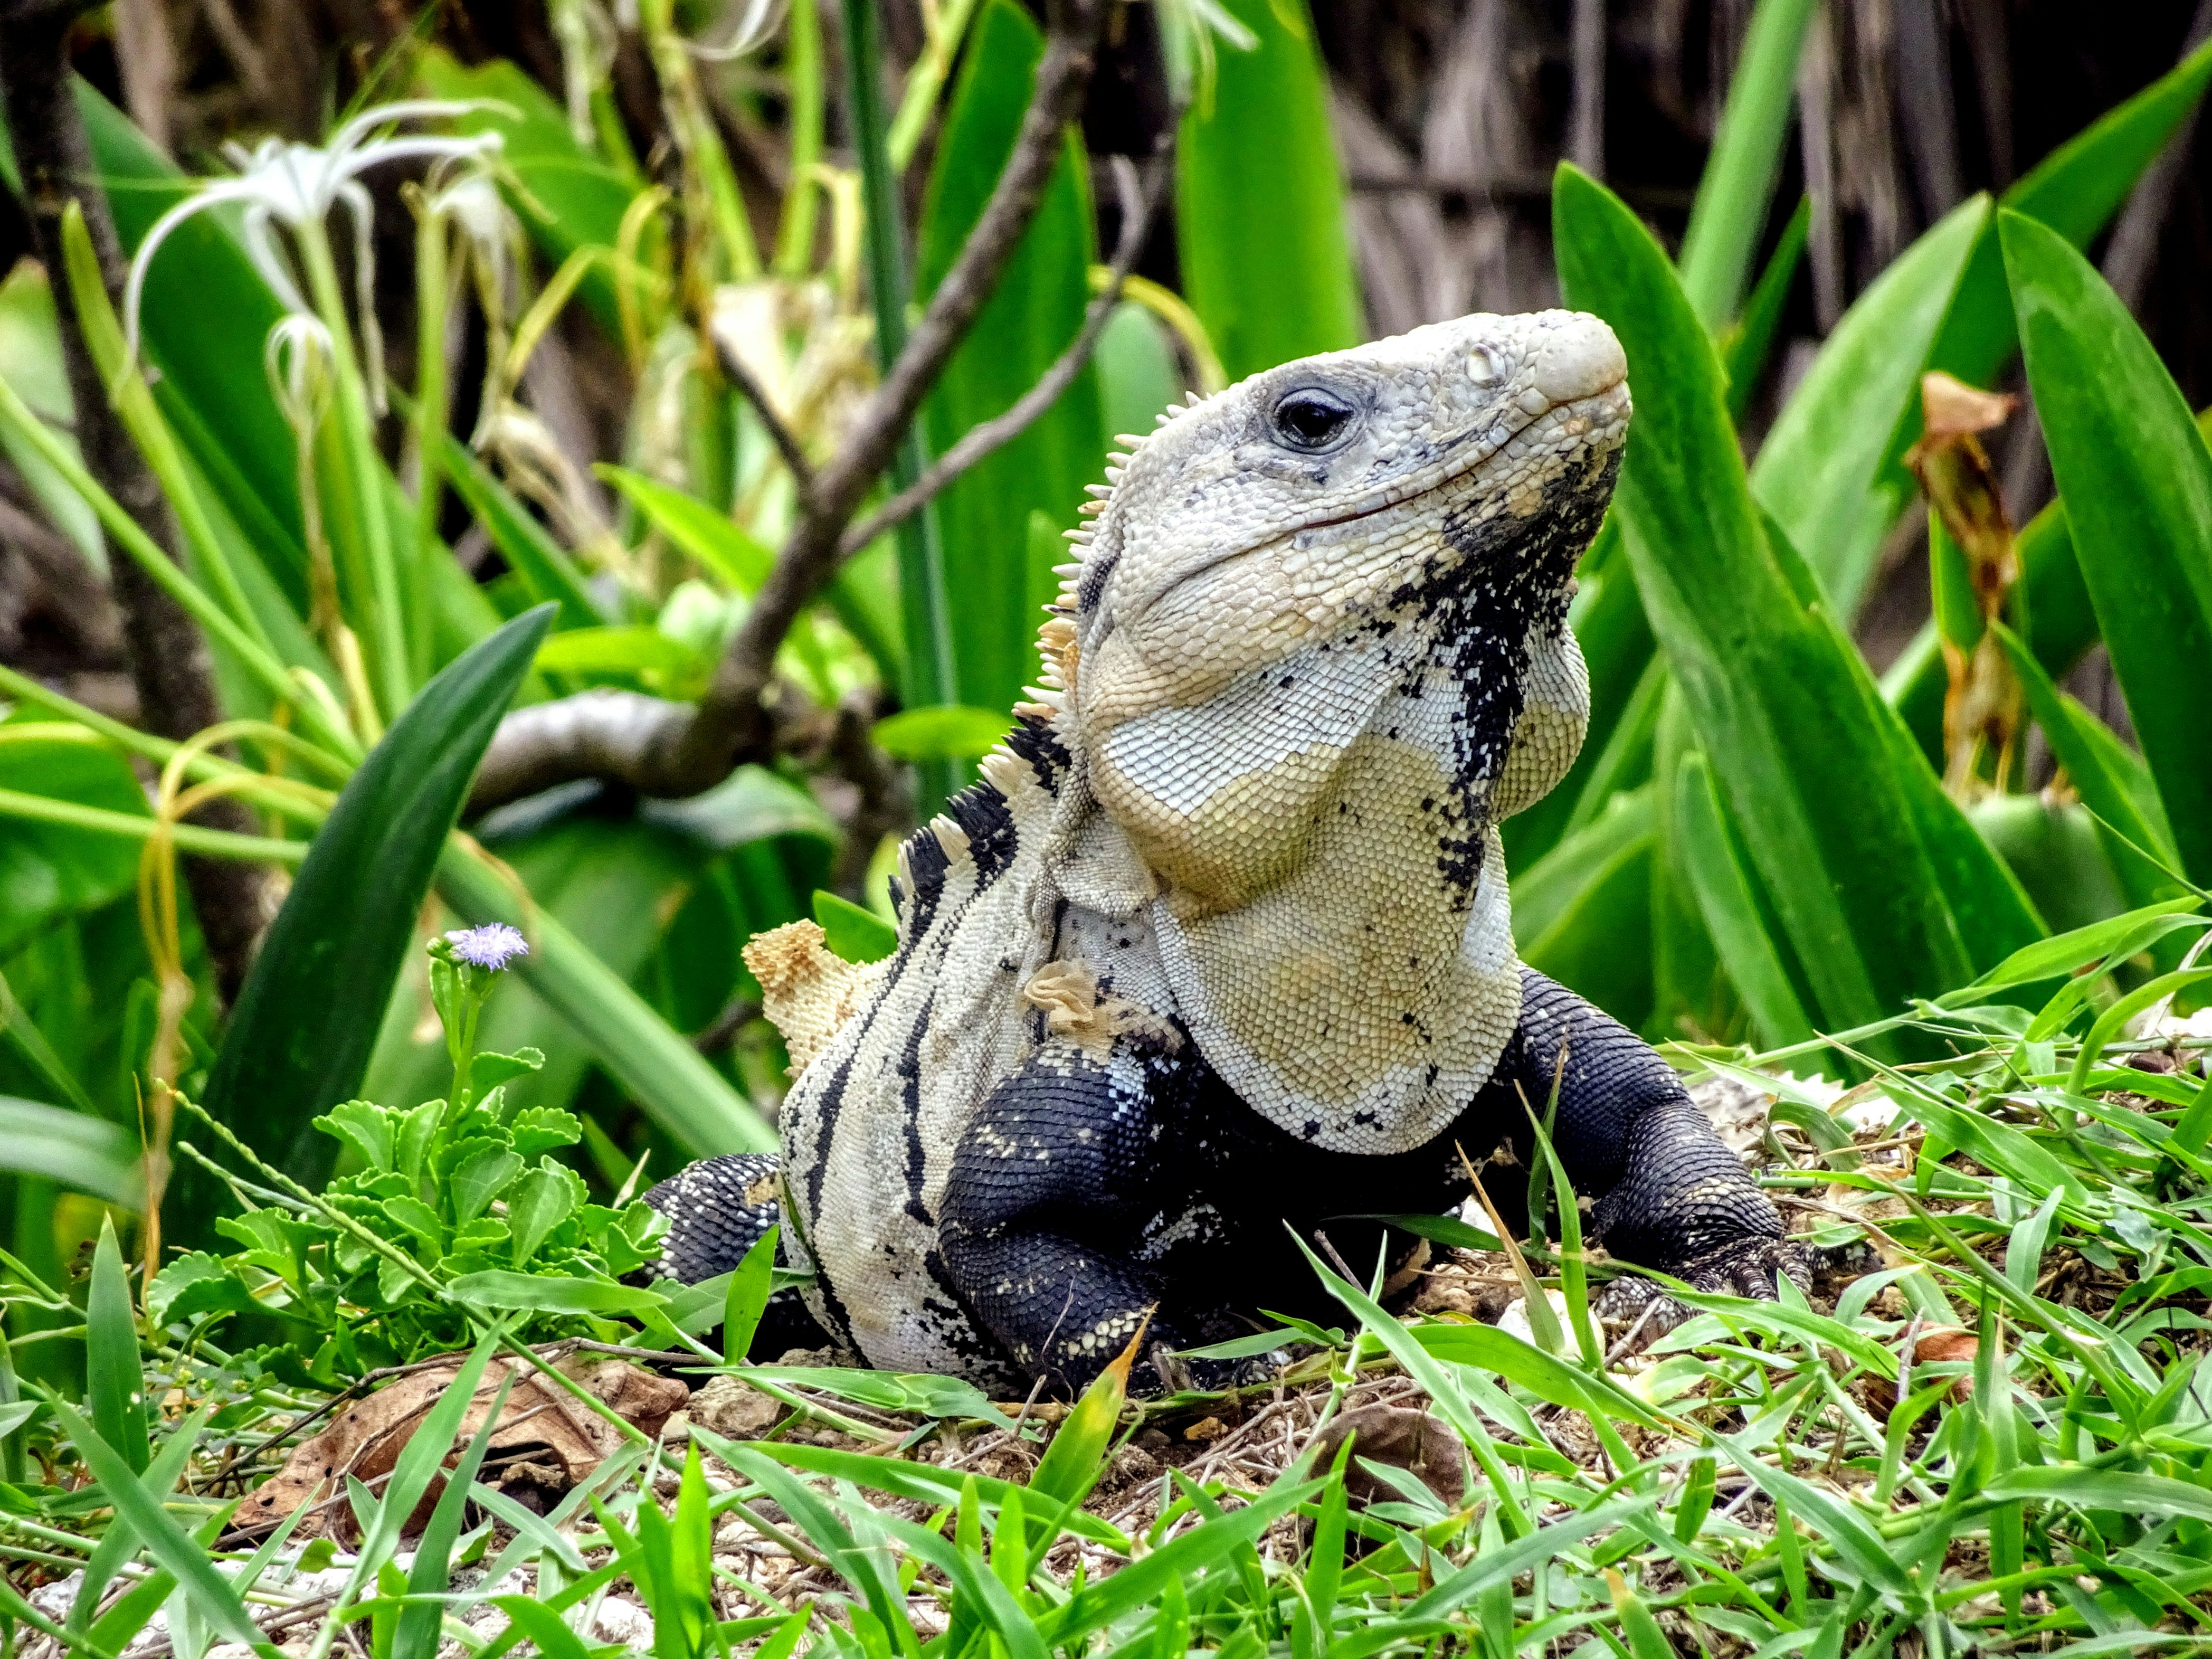 black and white bearded dragon on green grass during daytime